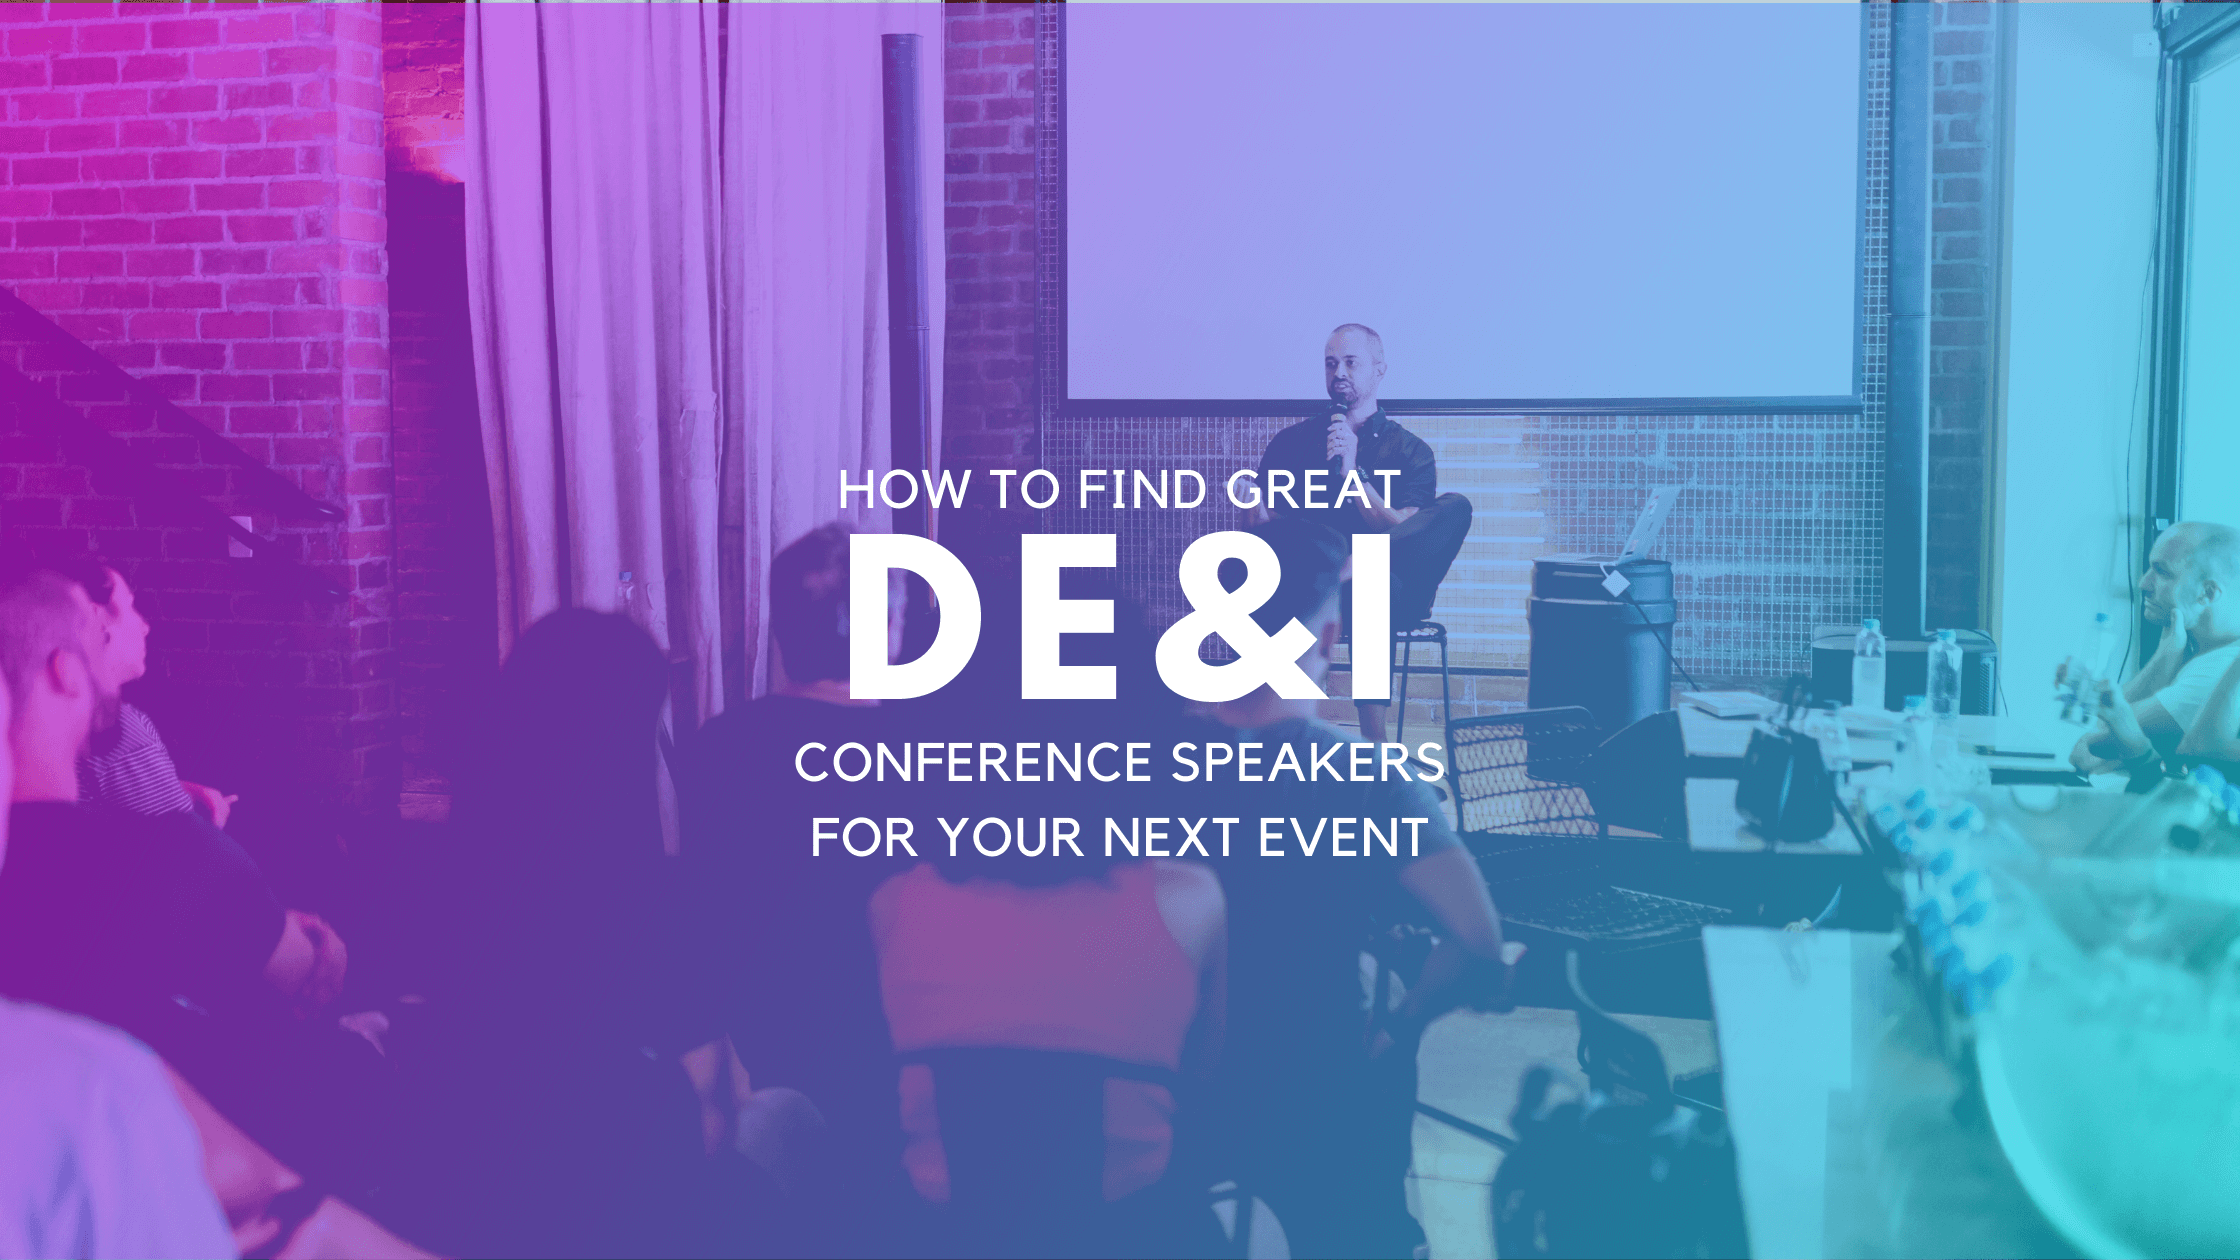 How To Find Great DE&I Conference Speakers For Your Next Event